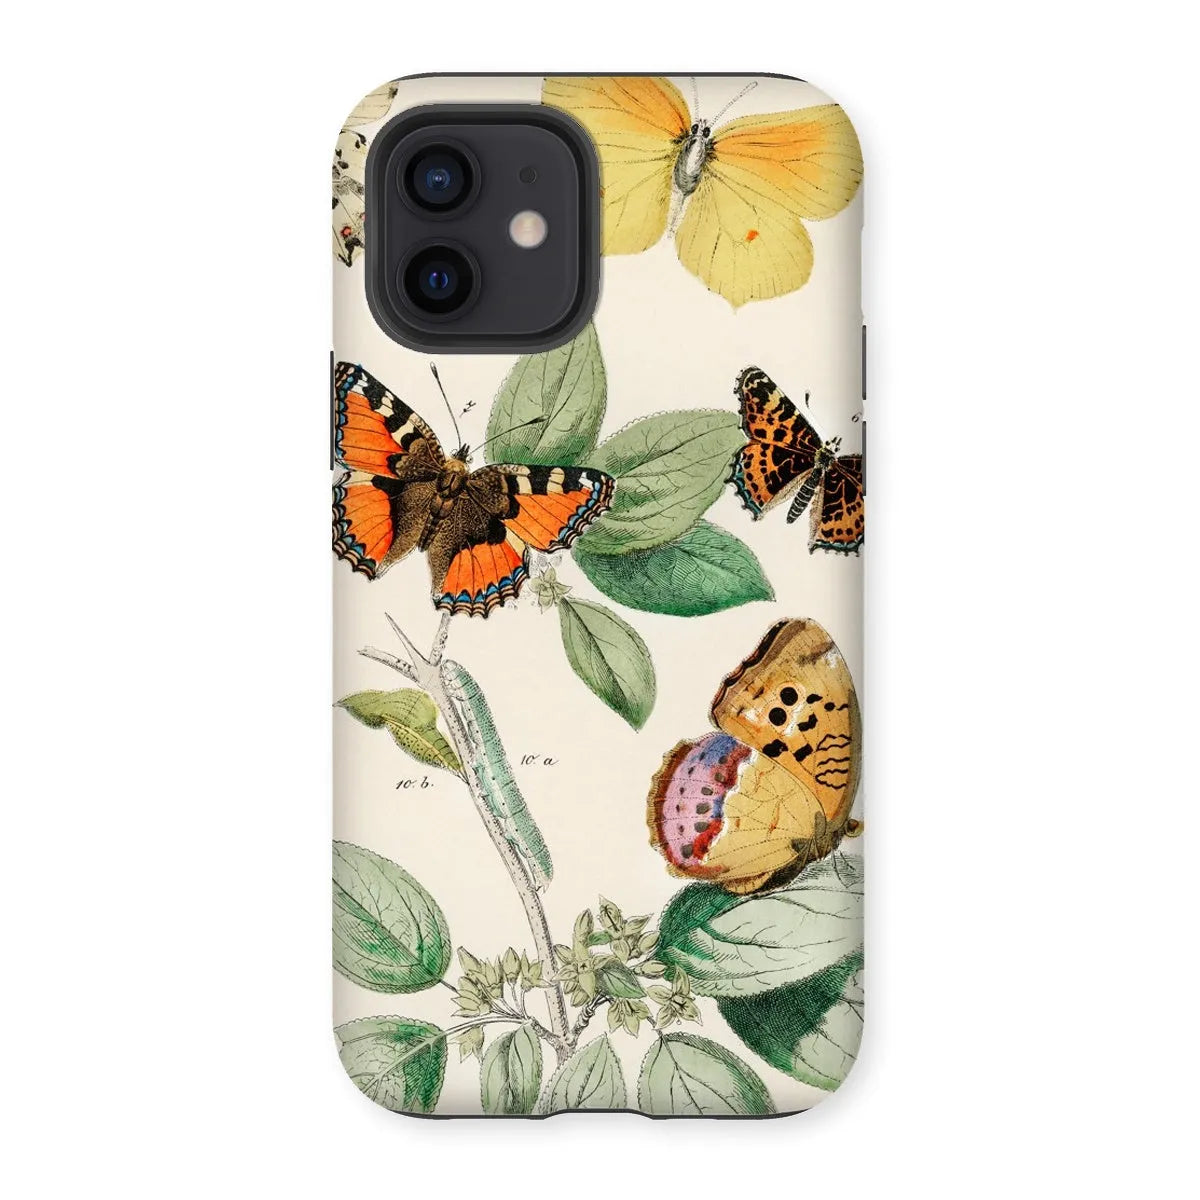 Butterfly Aesthetic Art Phone Case - William Forsell Kirby - Iphone 12 / Matte - Mobile Phone Cases - Aesthetic Art